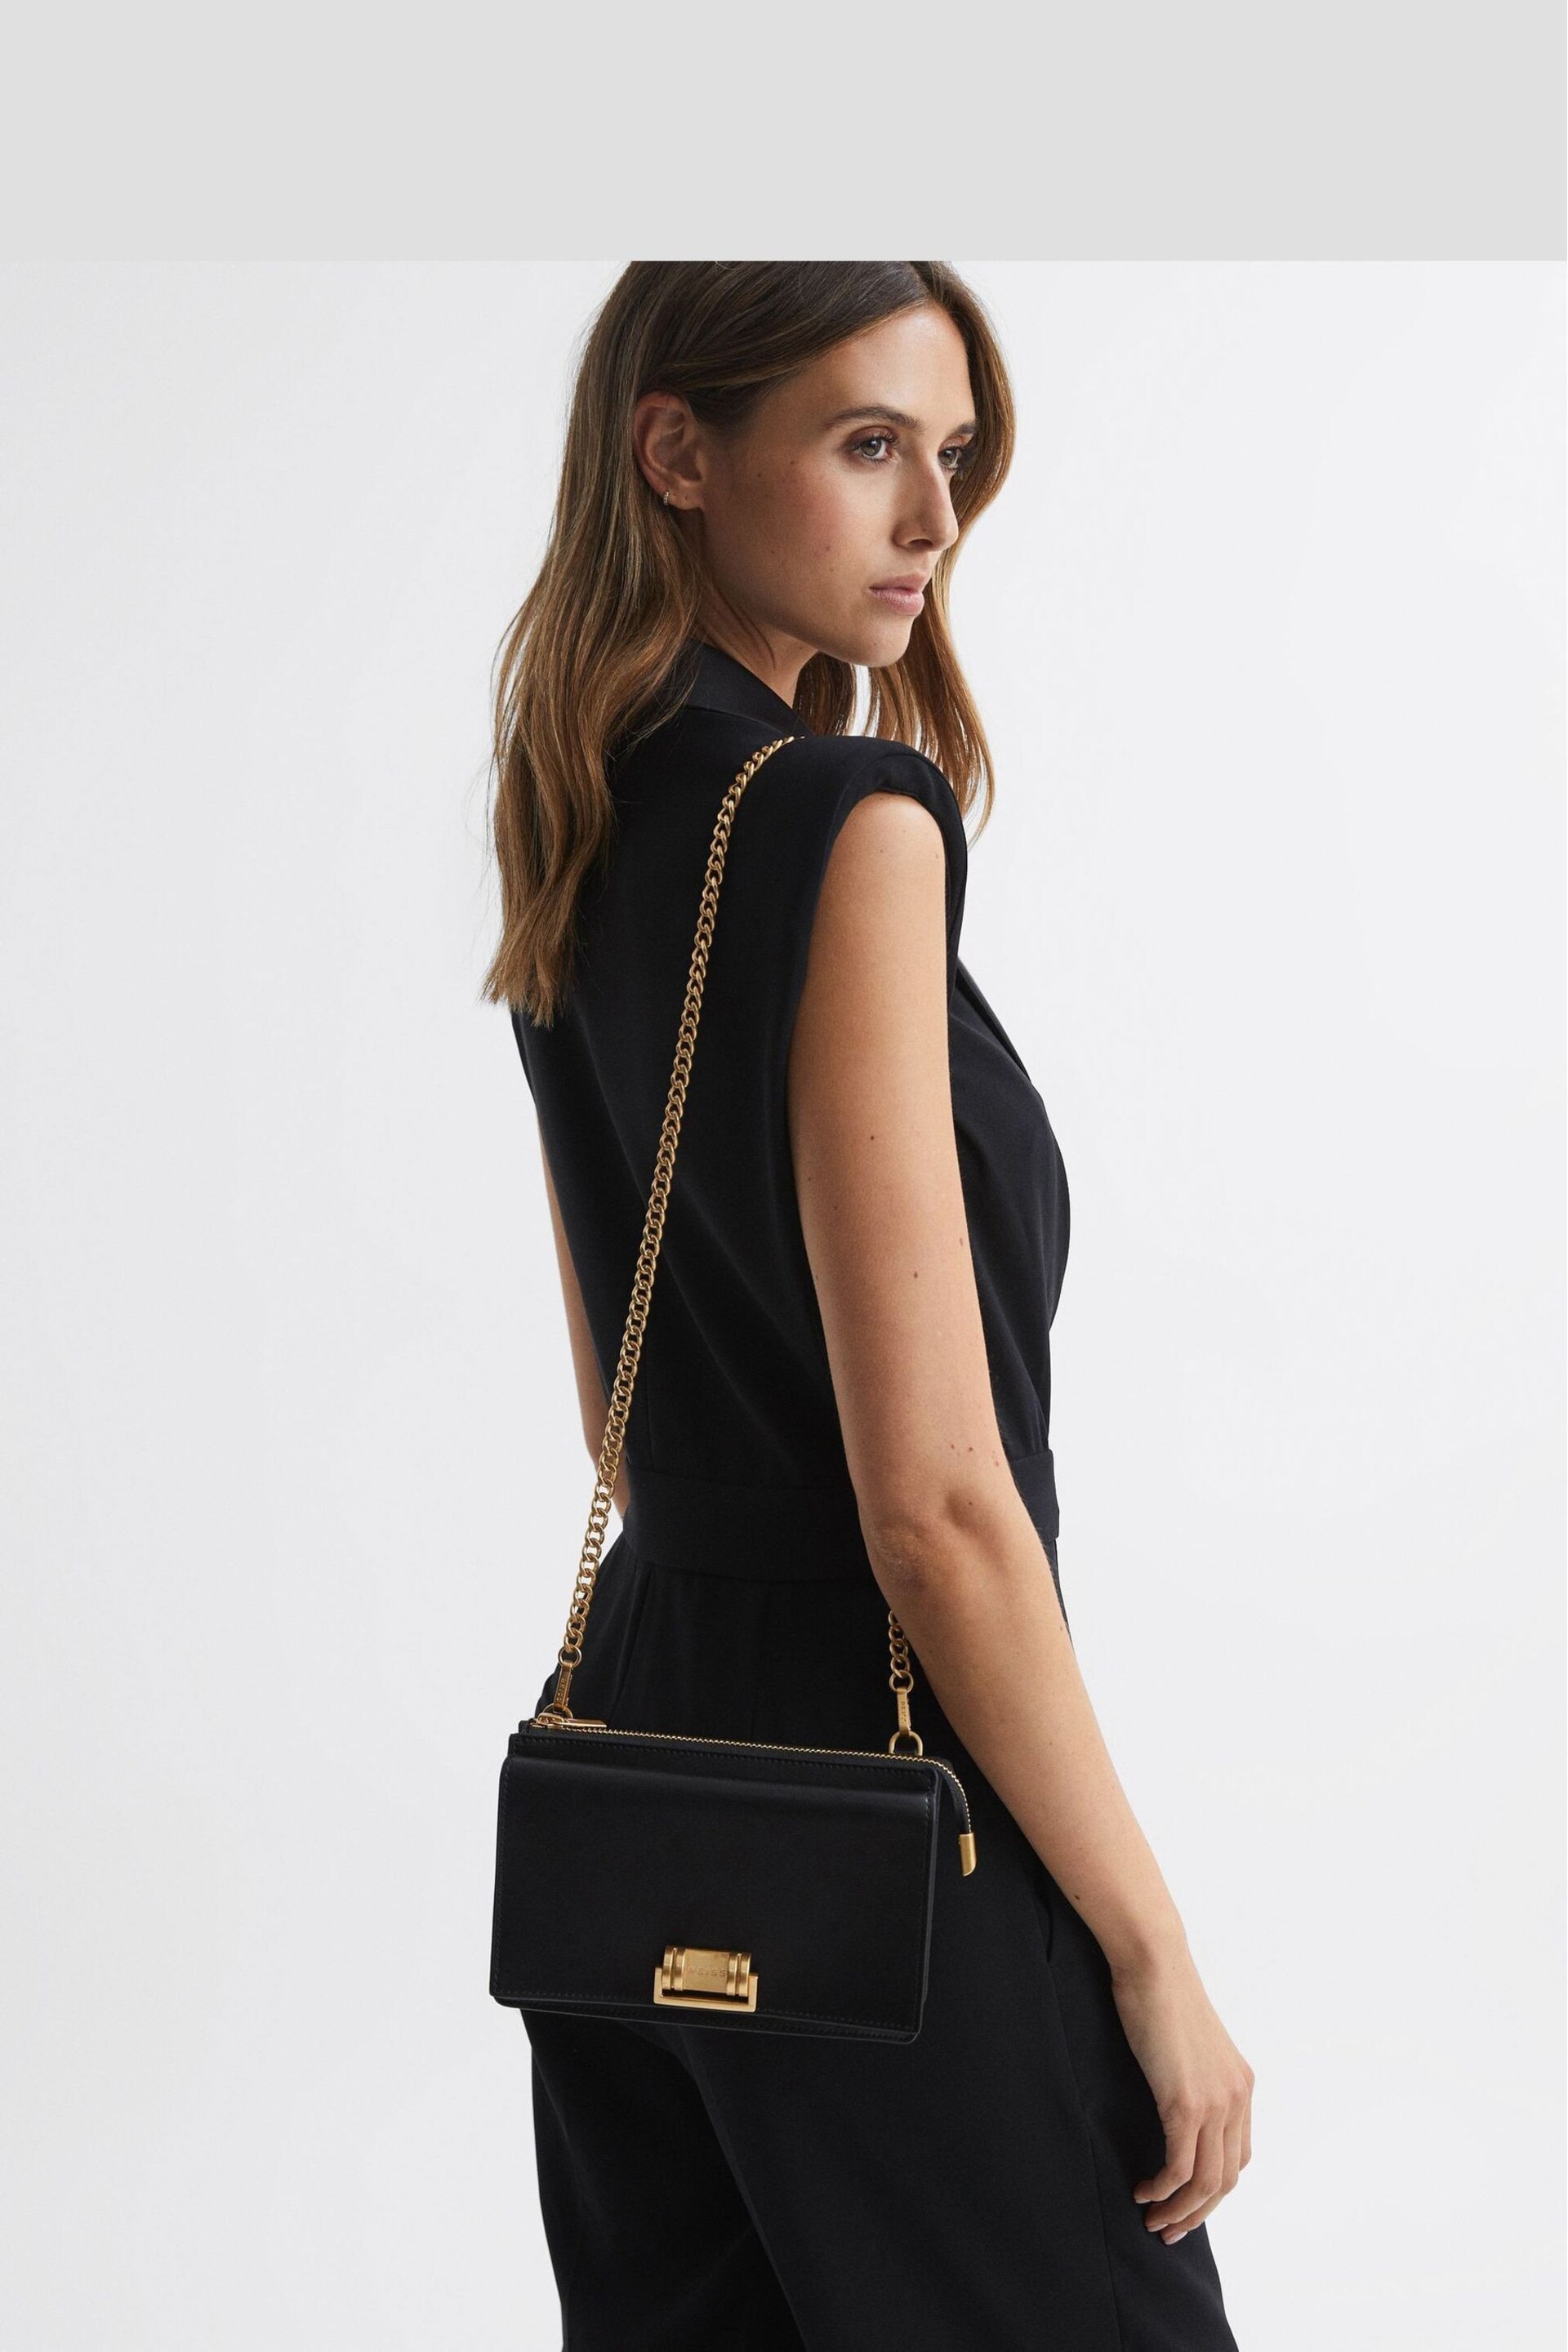 Reiss Black Picton Leather Chain Crossbody Bag - Image 2 of 5